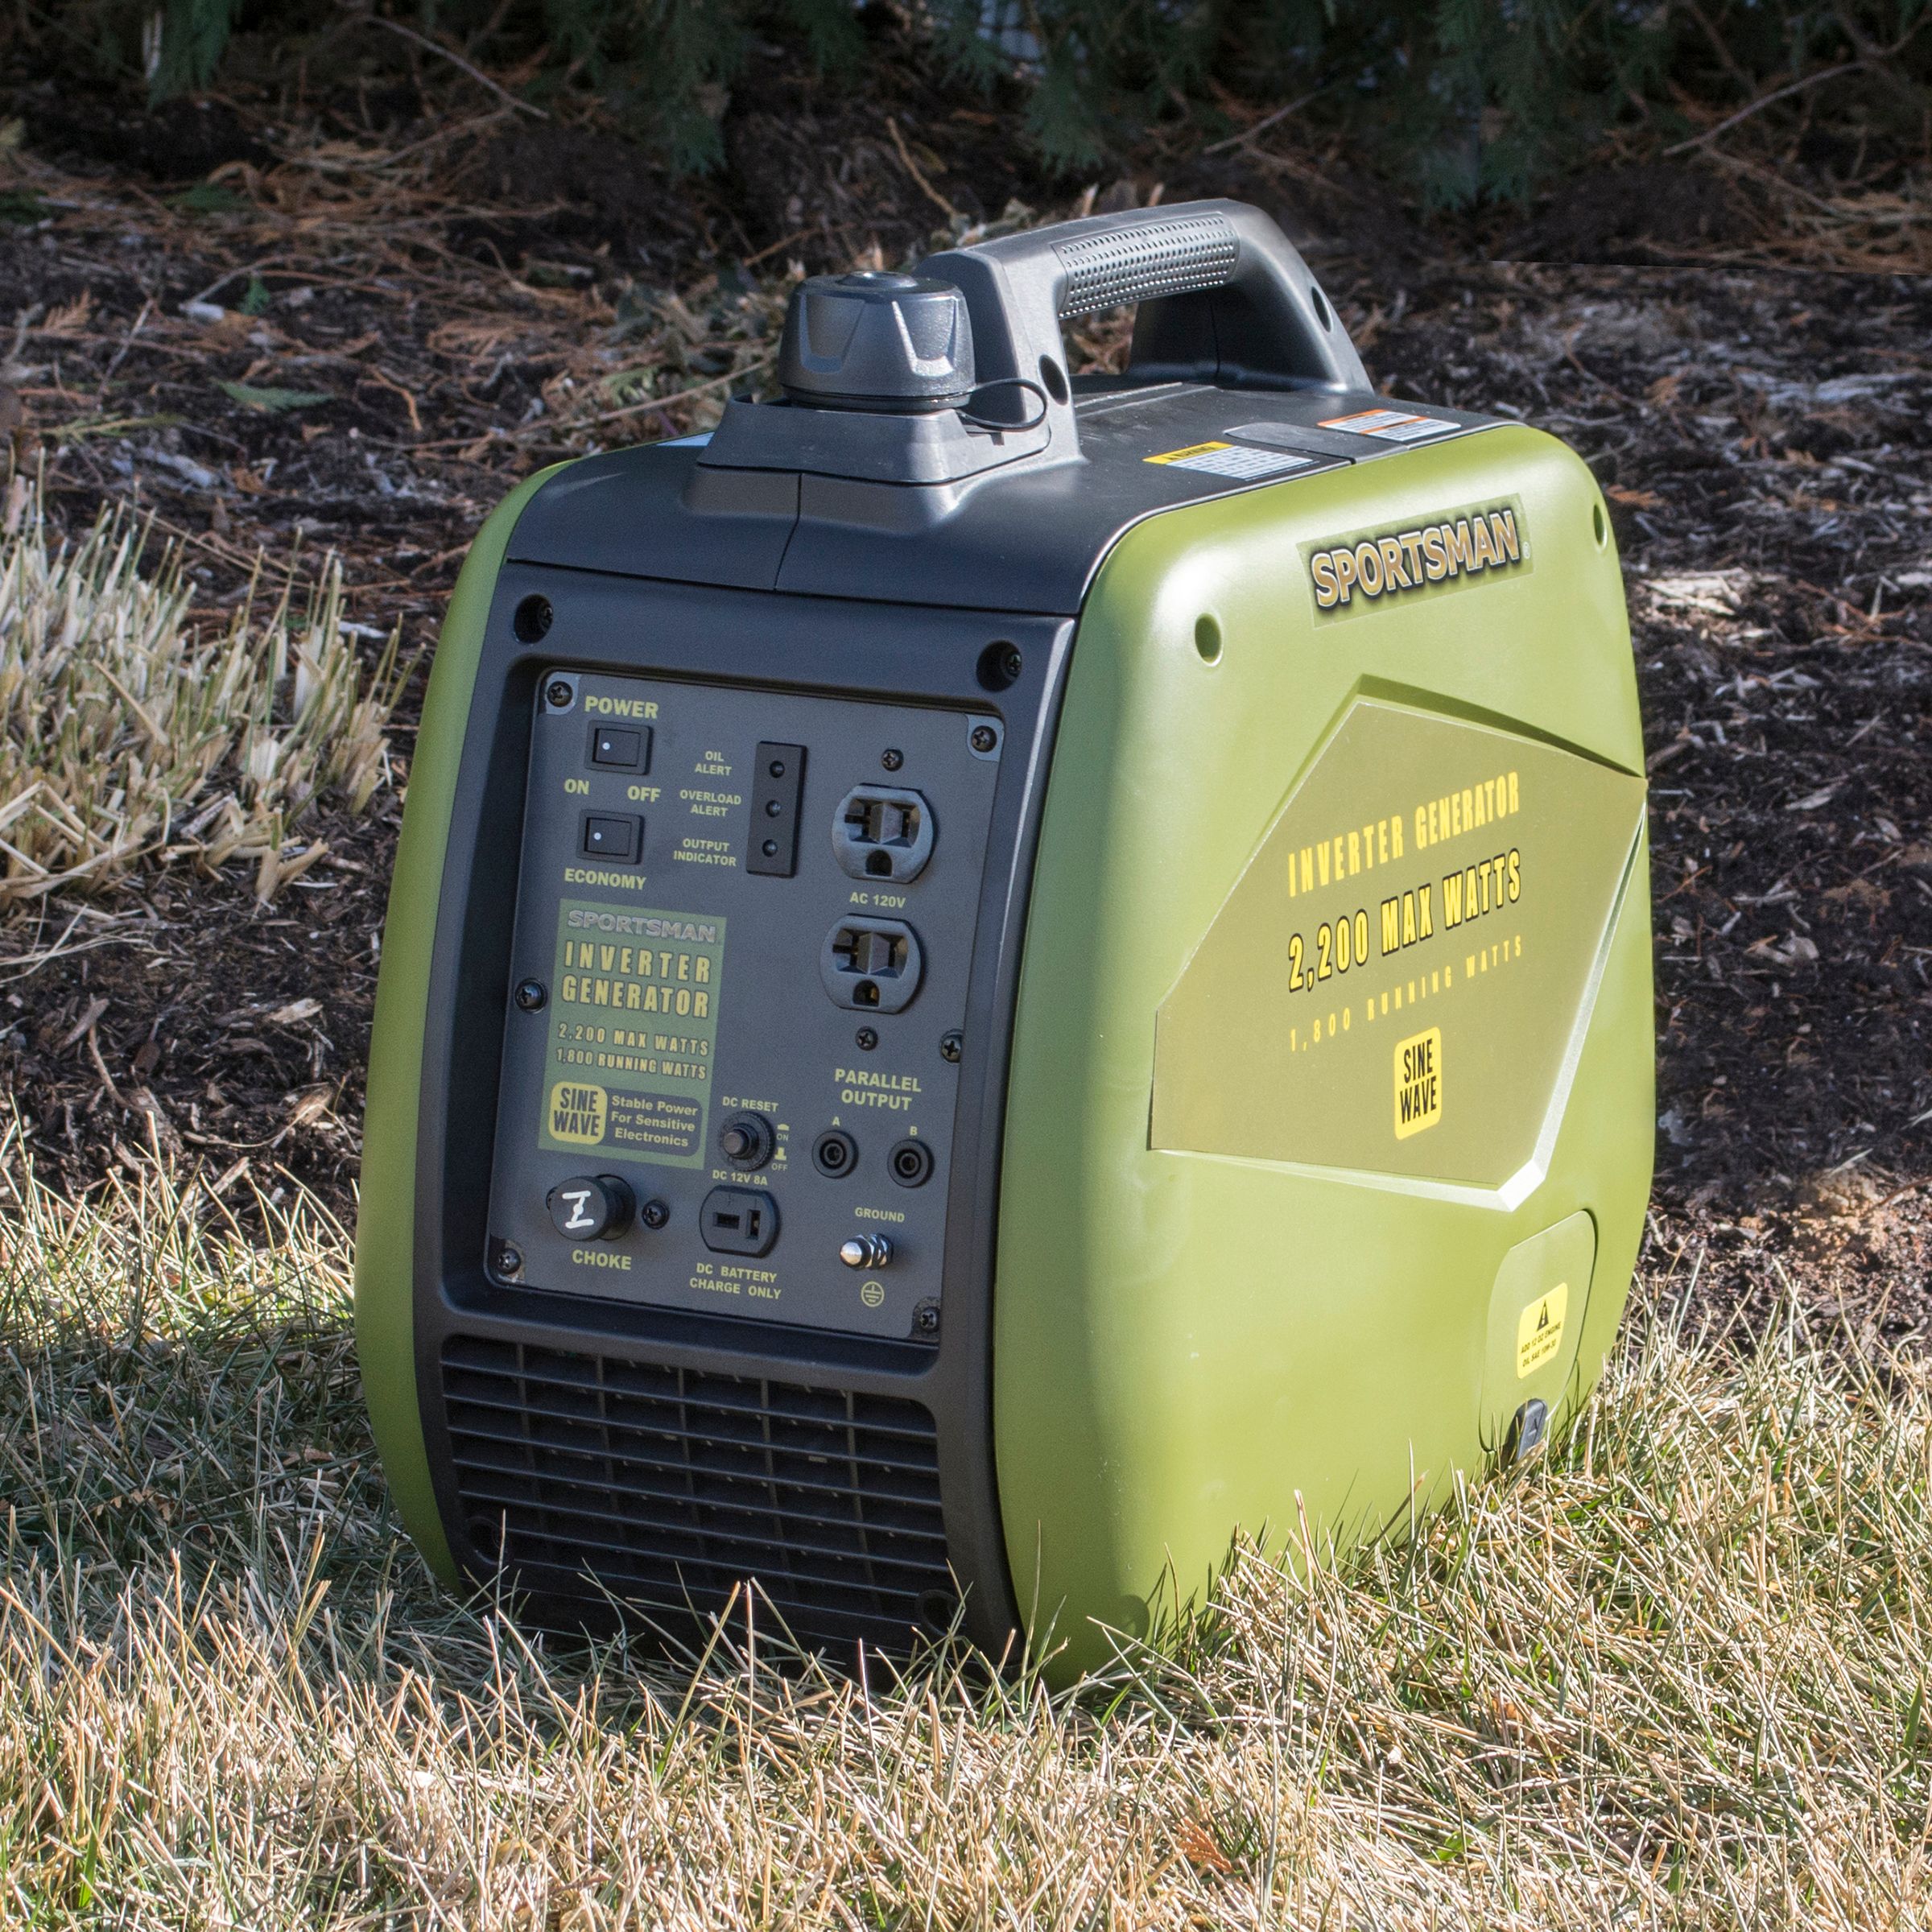 Sportsman 2200-Watt Gasoline Powered Recoil Start Portable Digital Inverter Generator with Parallel Capability - CARB Approved - image 3 of 6